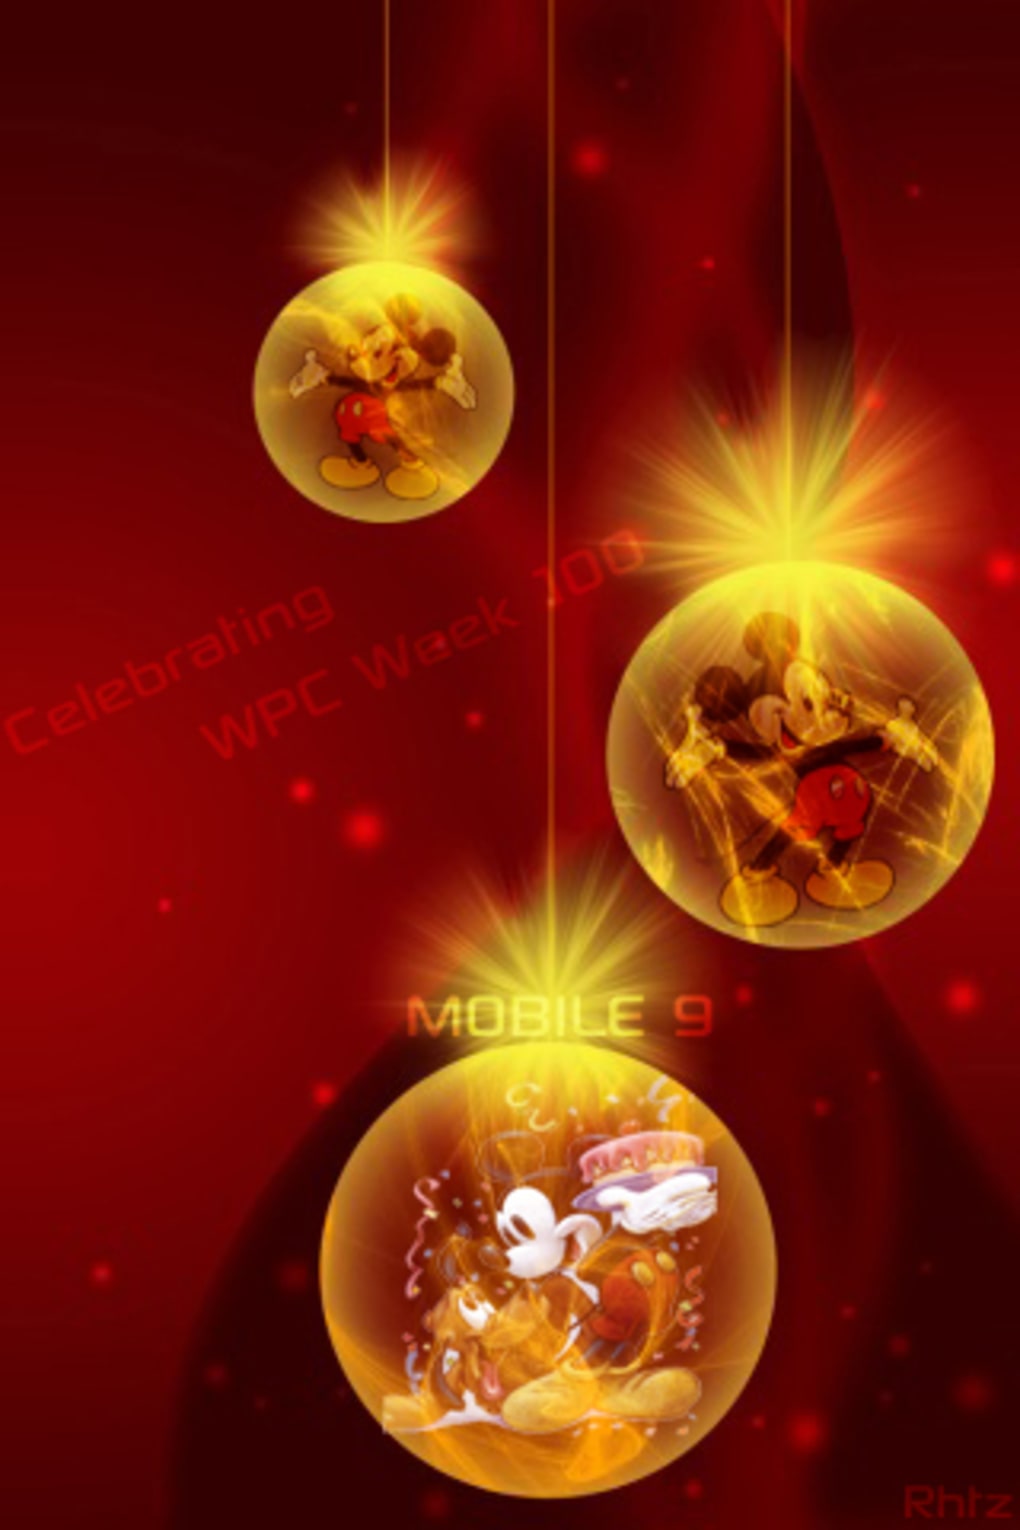 Sfondi Natalizi Android.Christmas Wallpapers Per Iphone E Android Iphone Download